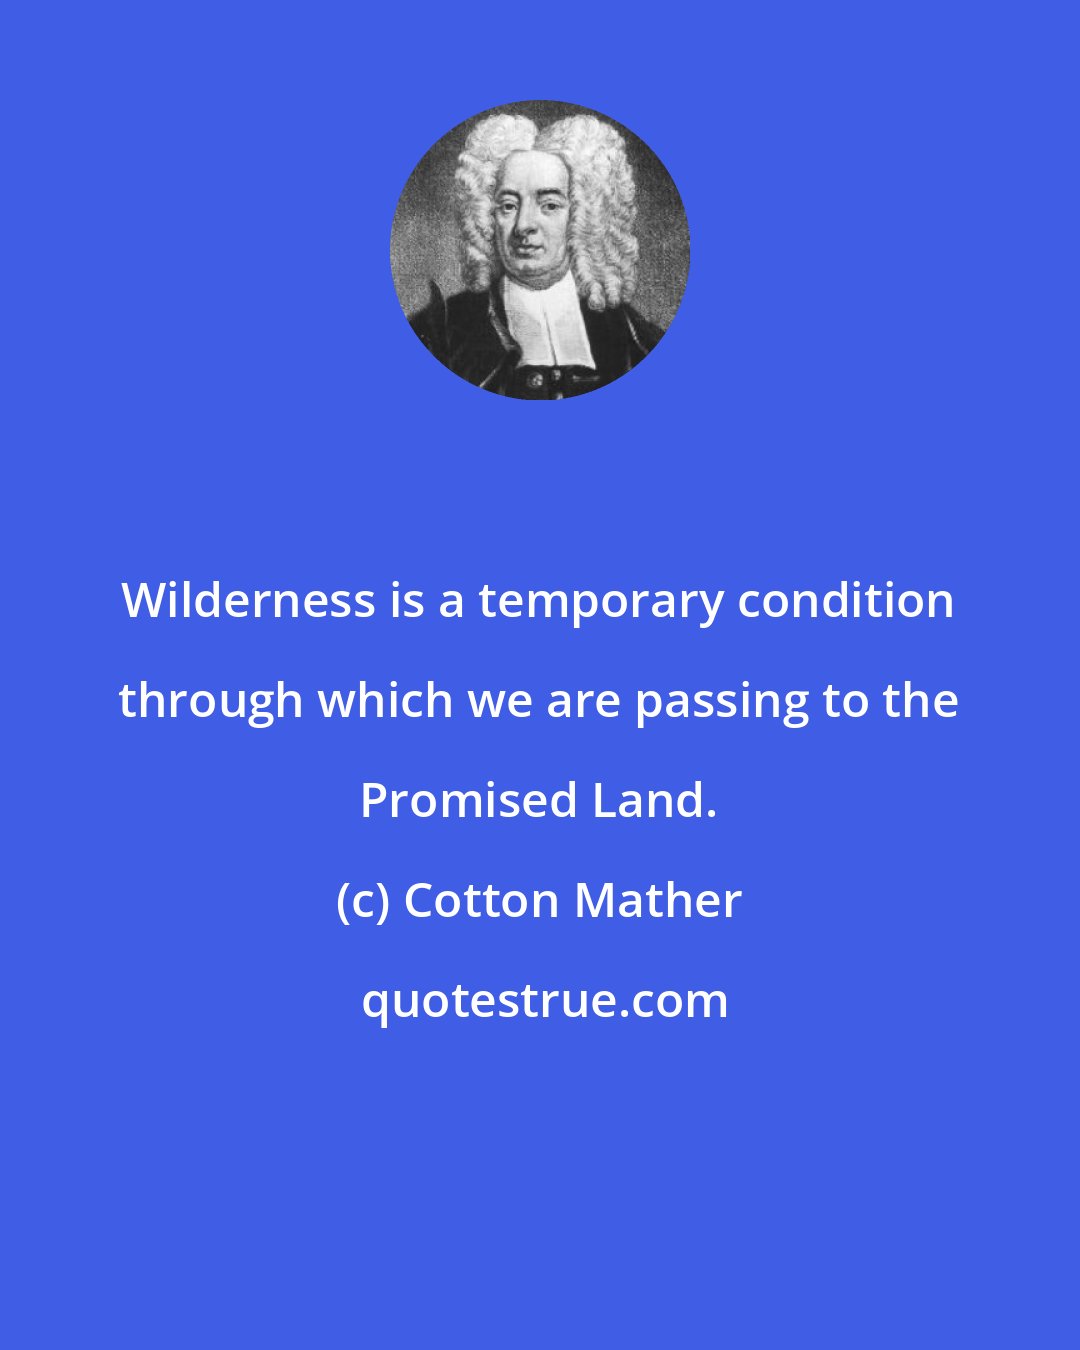 Cotton Mather: Wilderness is a temporary condition through which we are passing to the Promised Land.